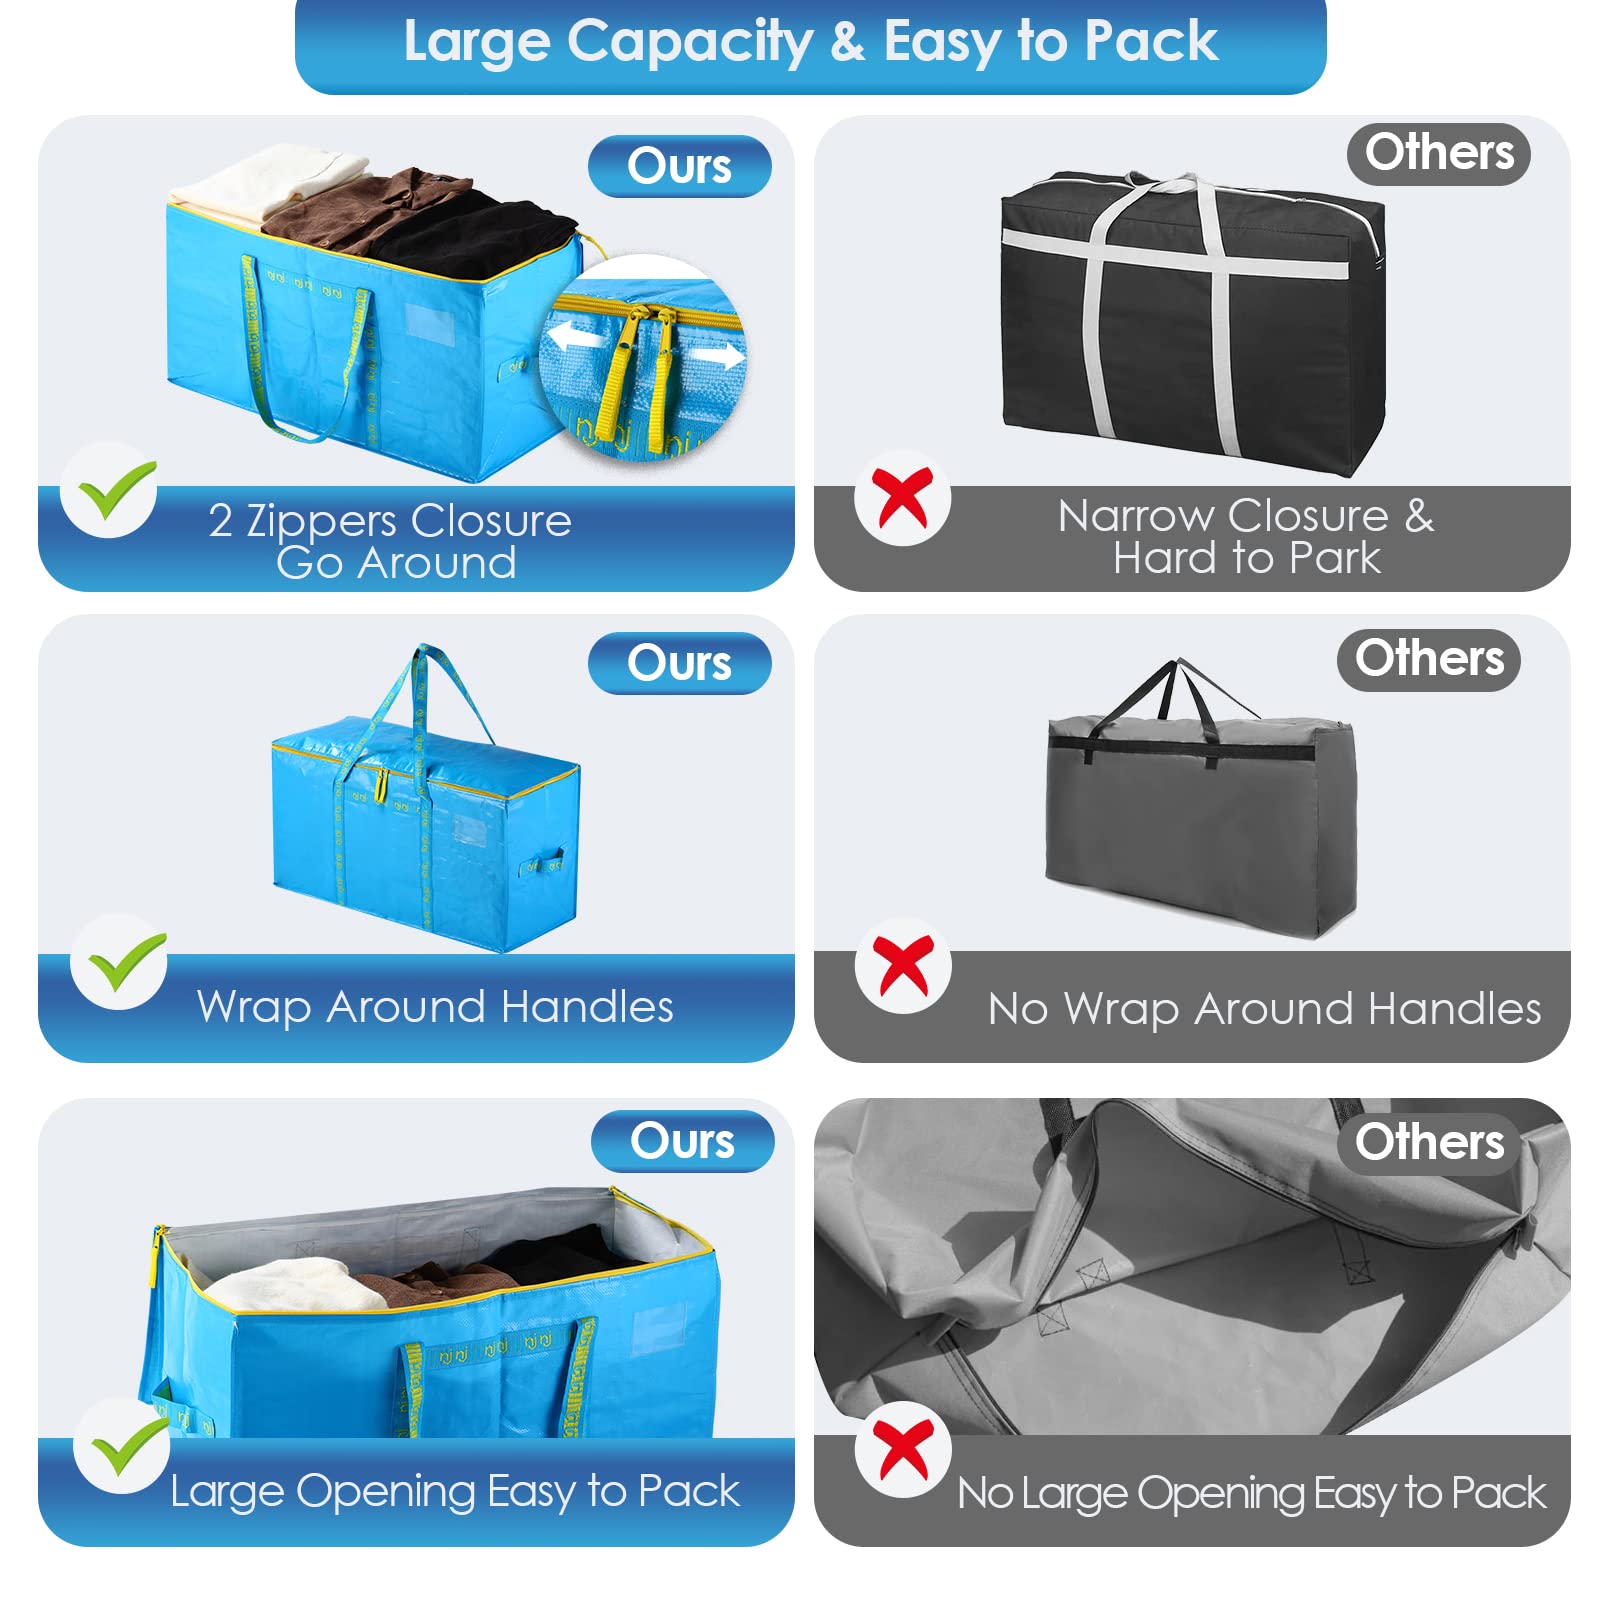 Extra Large Heavy Duty Moving Bags,Storage Bags with Handles for Packing,8 Large Totes,Waterproof Oversized Organizers,Reinforced Puncture Resistance and Strong Zipper Pulls,Alternative To Moving Box